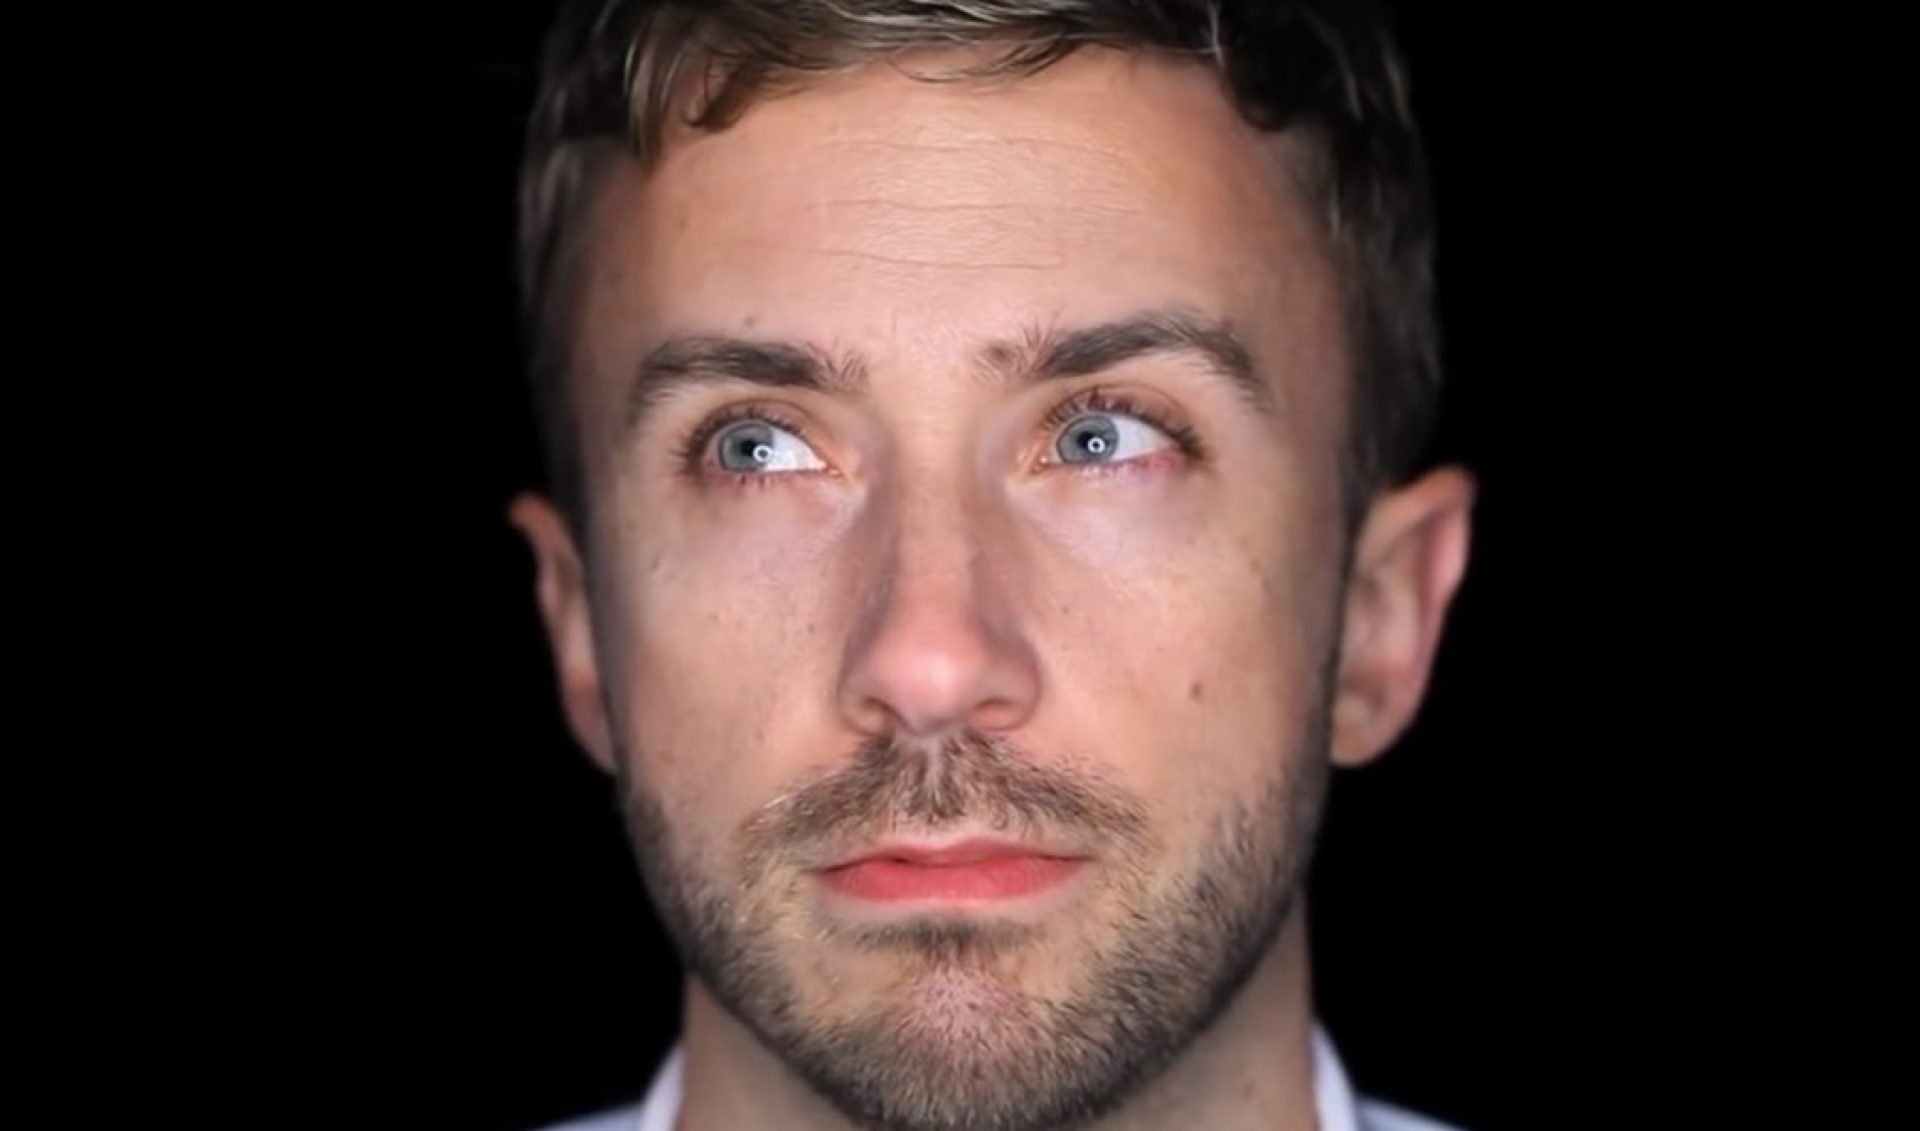 YouTube Millionaires: Peter Hollens Succeeds With “Hands On” Approach